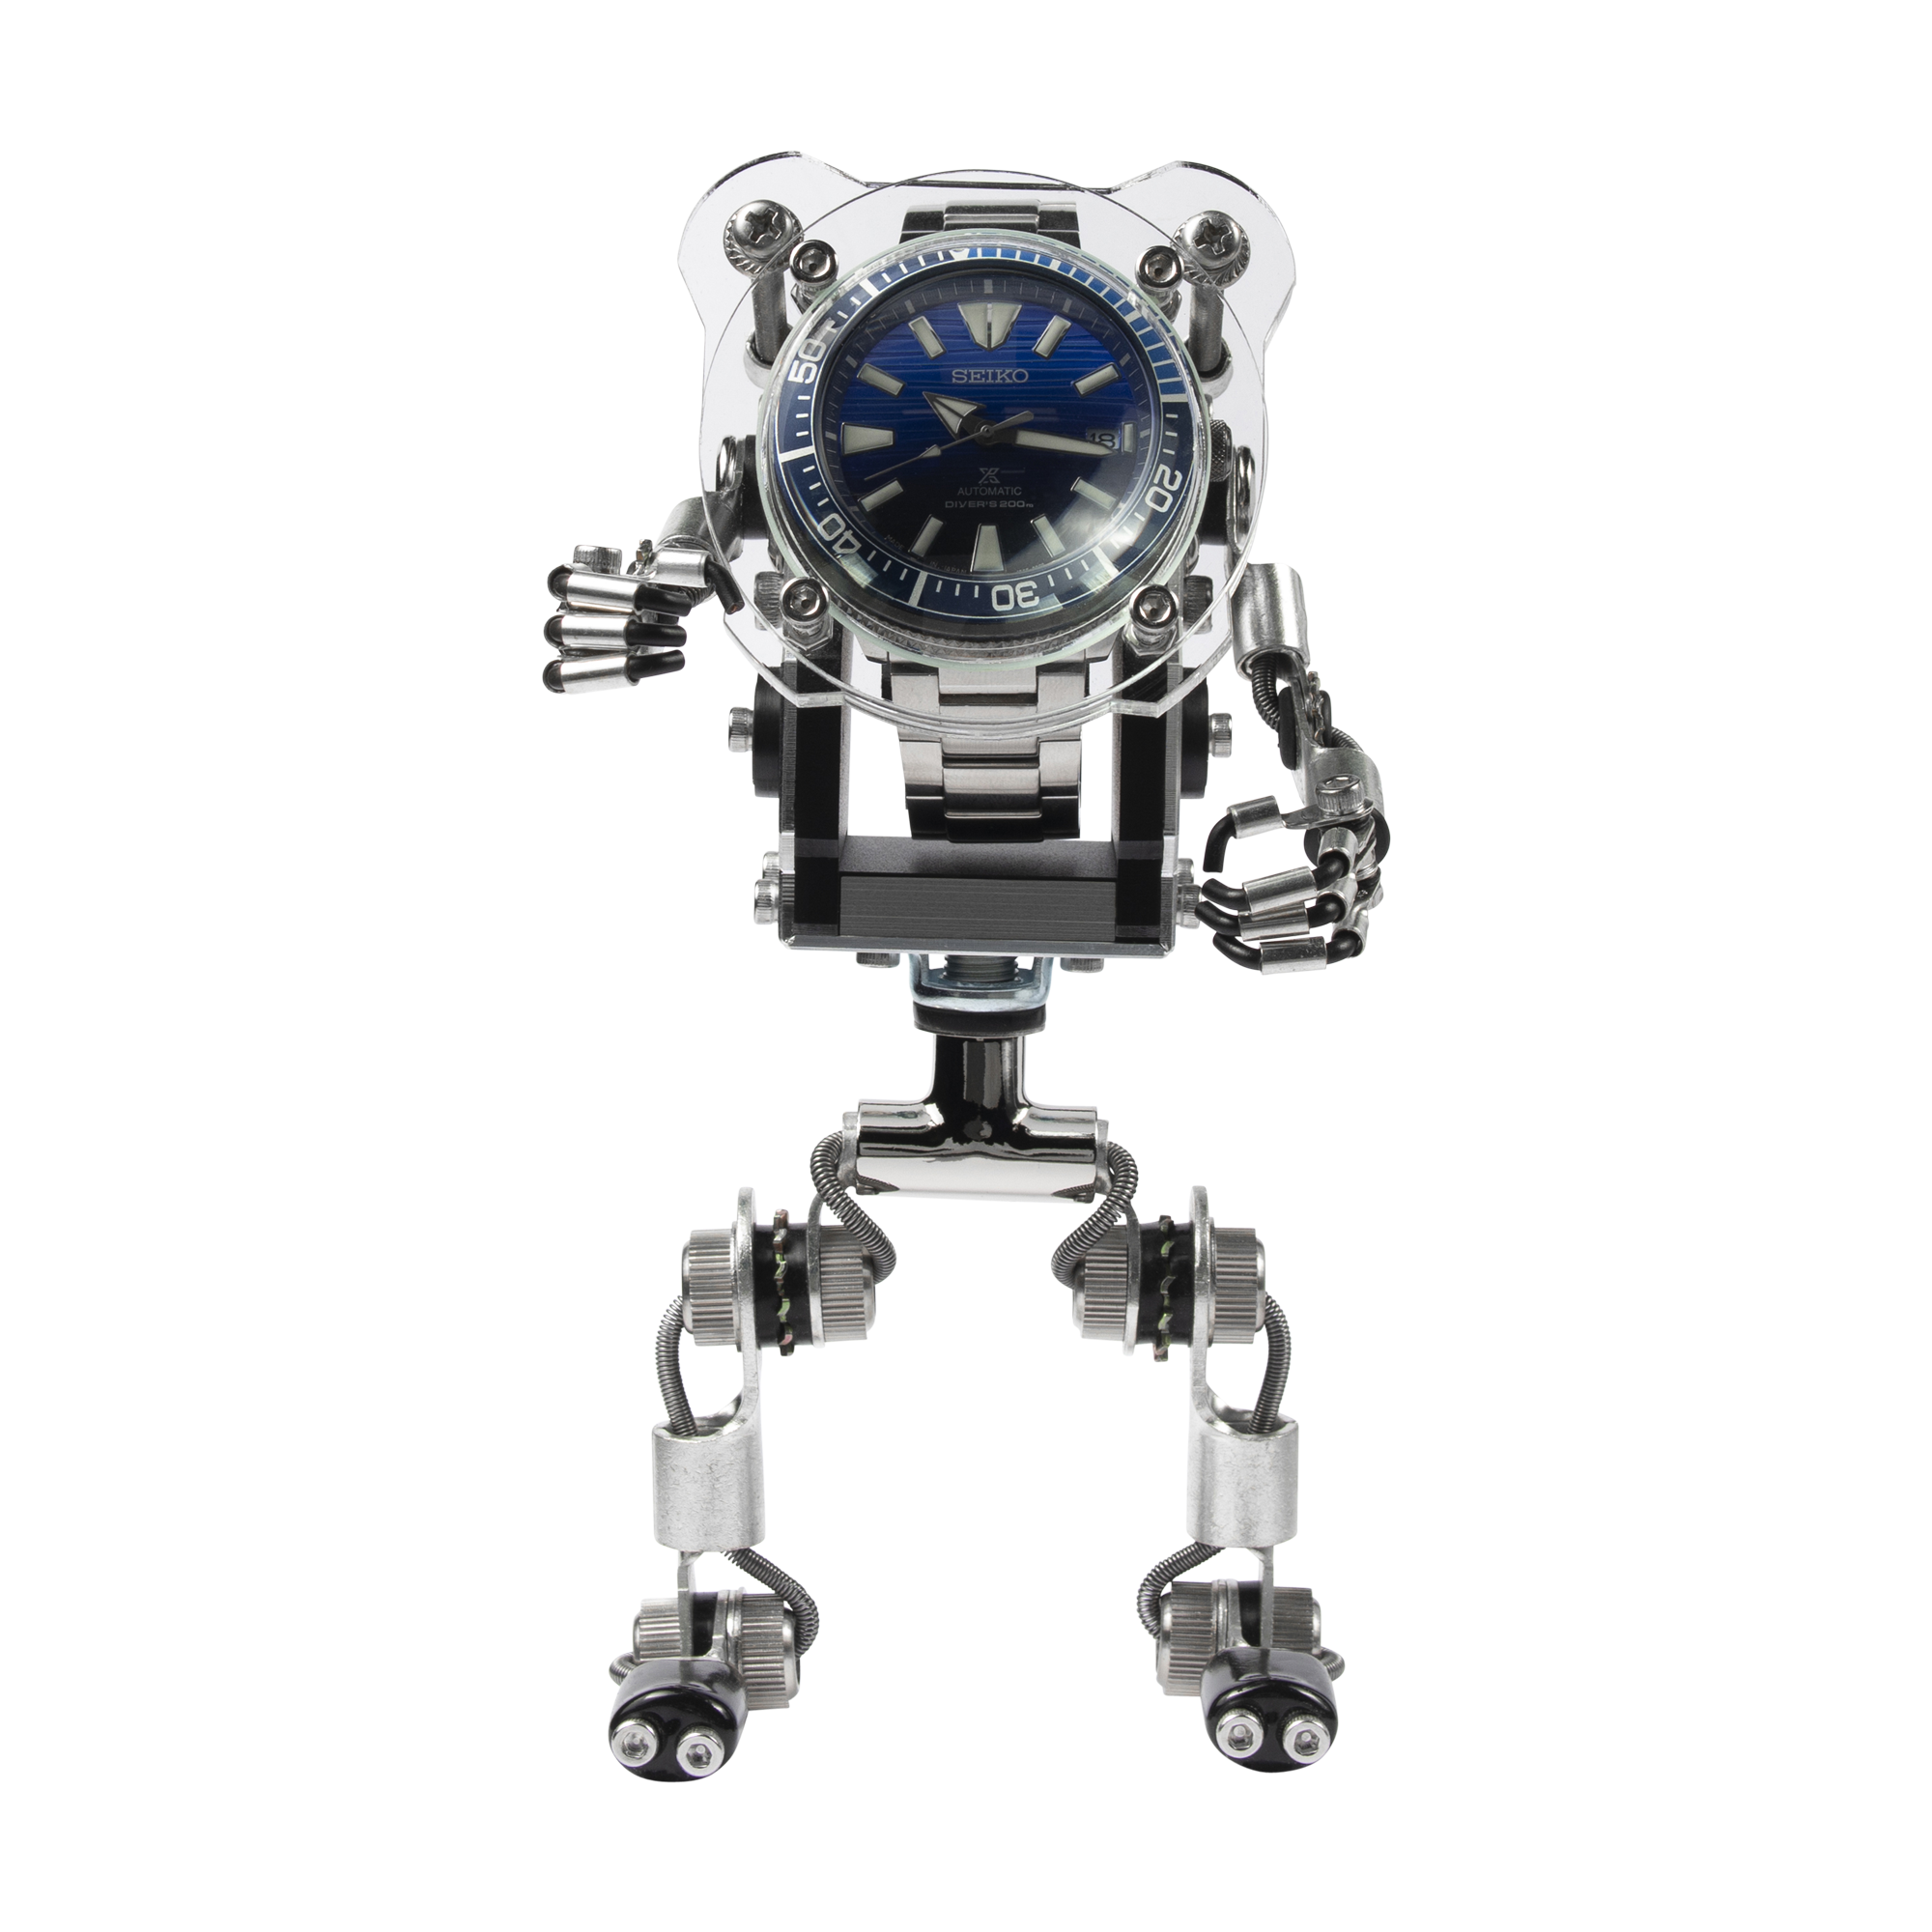 [RoboToys] Watch Stand - RoboMech - Black with Magnifier